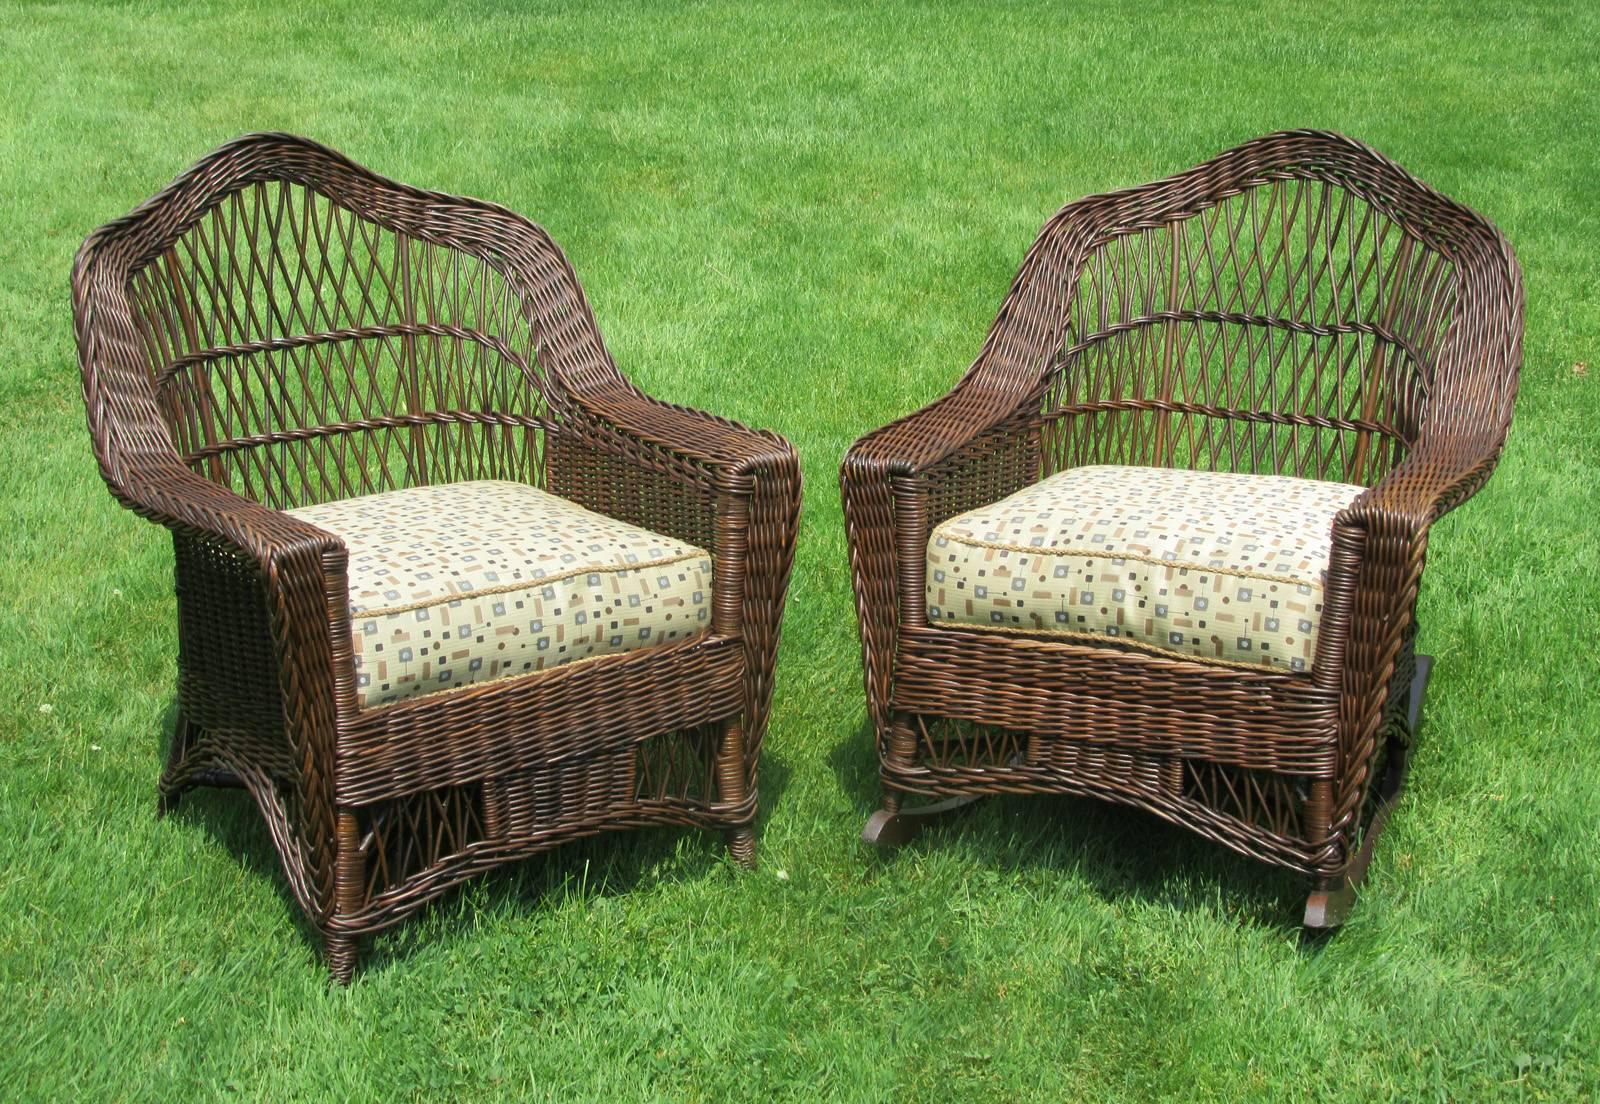 Matching pair bar harbor wicker armchair and rocking chair in dark natural stained finish. Combination of traditional bar harbor latticing and solid woven panels with crownback form to frames. Original inner-spring seat cushions professionally